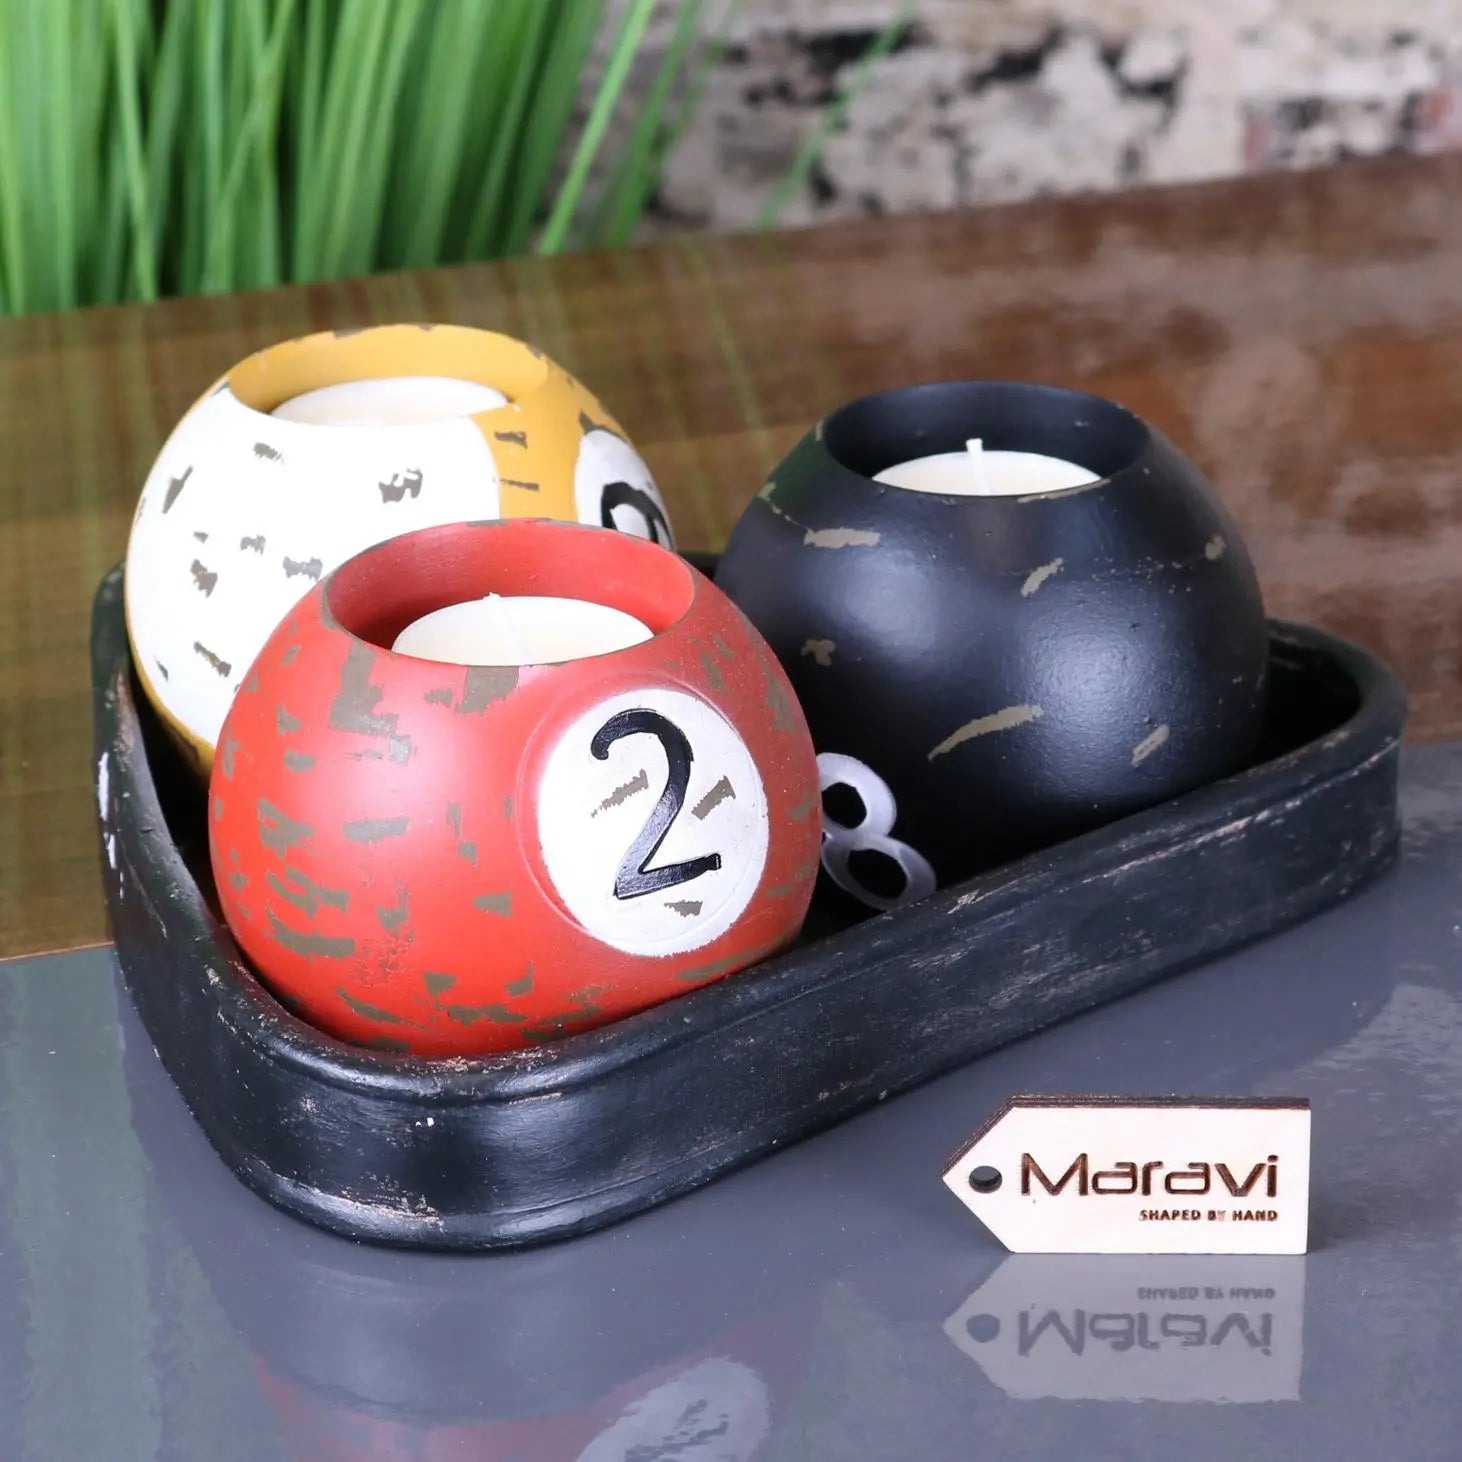 Ingali Pool Ball Candle Holders with Tealights In